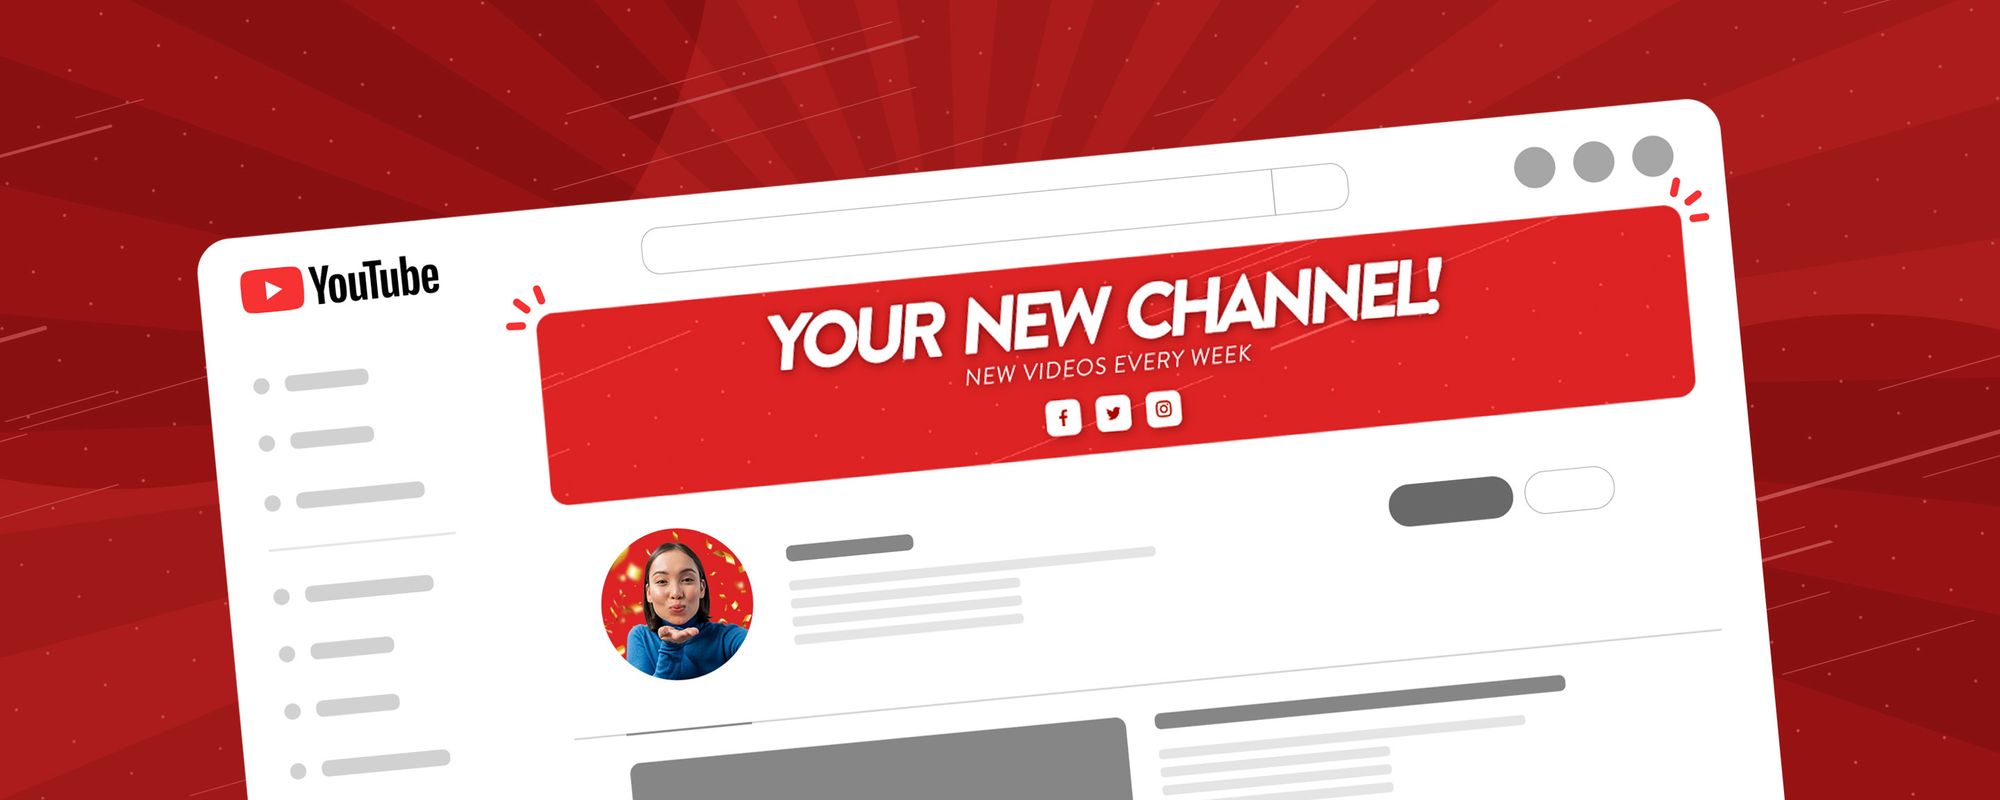 Image of a customized YouTube channel banner.